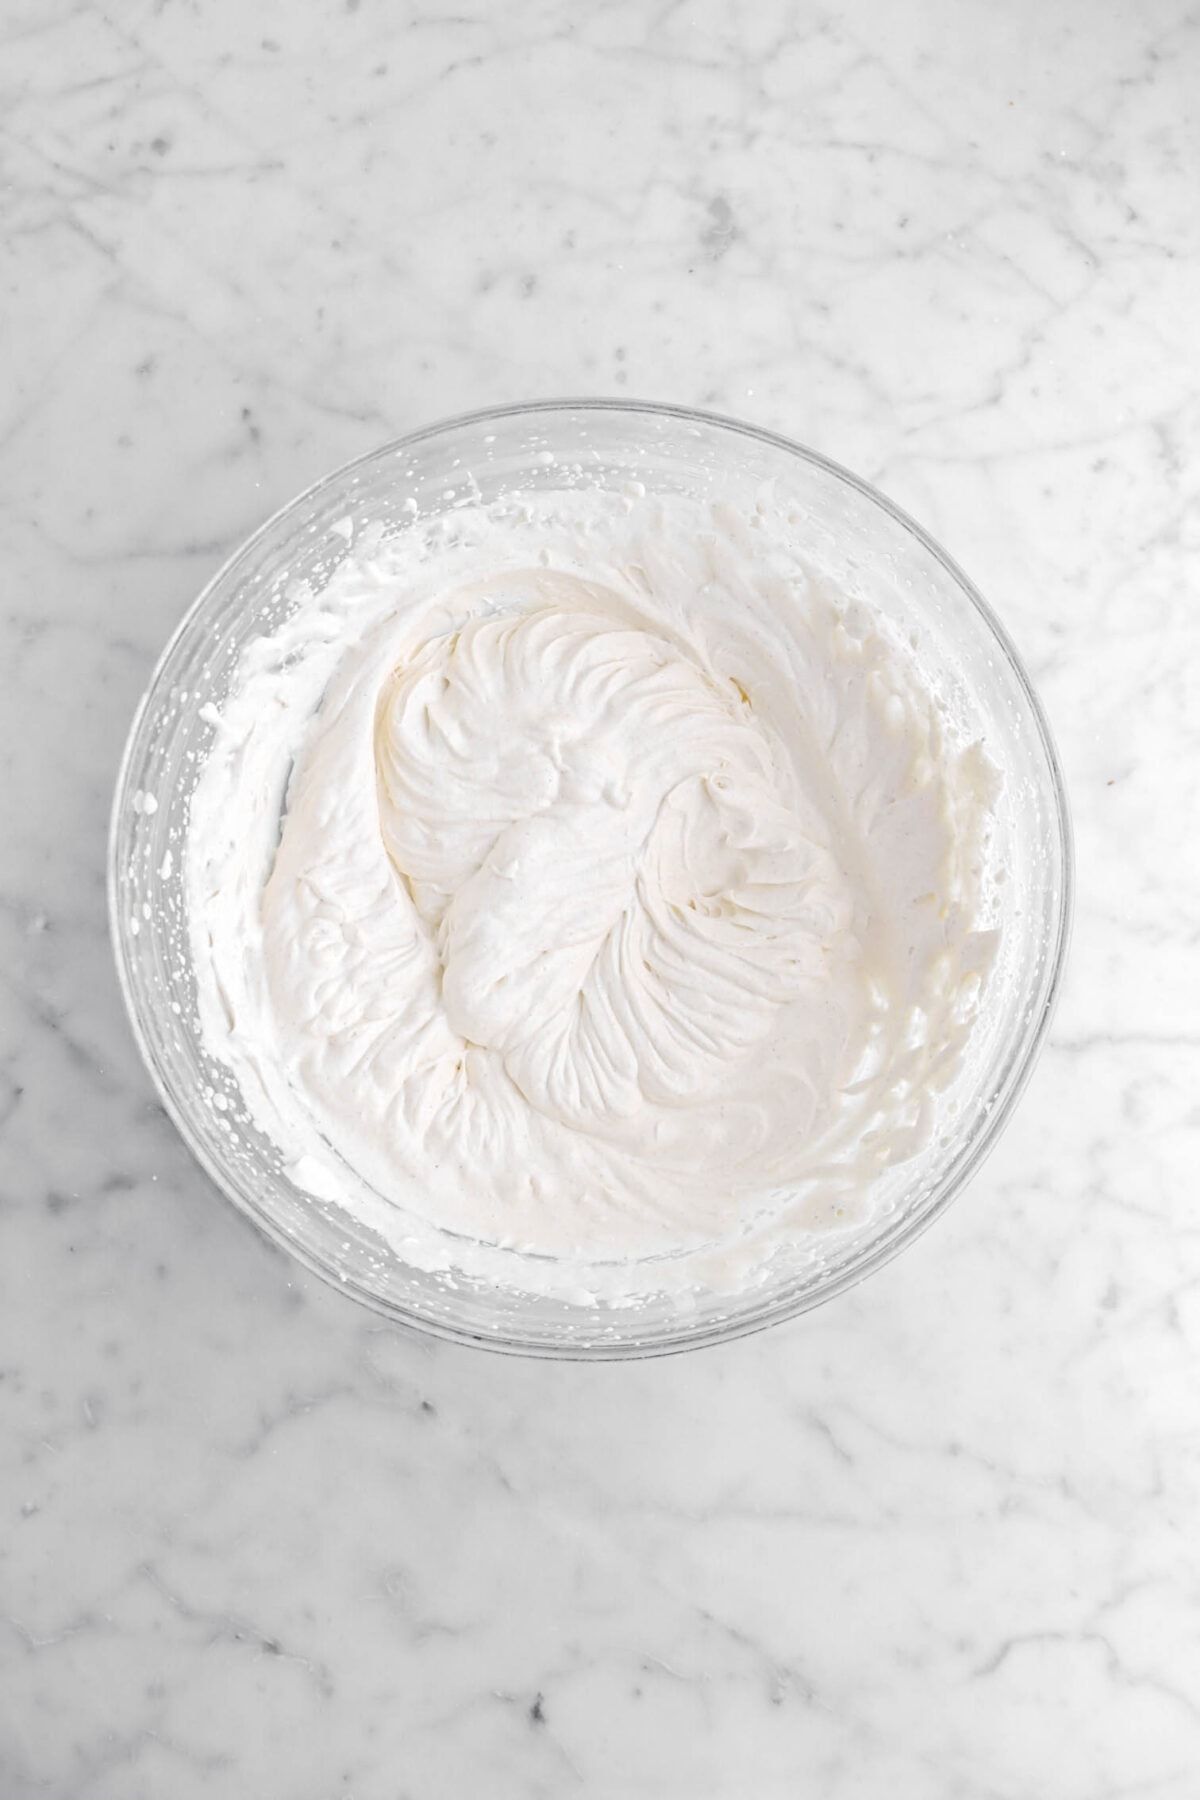 spiced whipped cream in glass bowl.